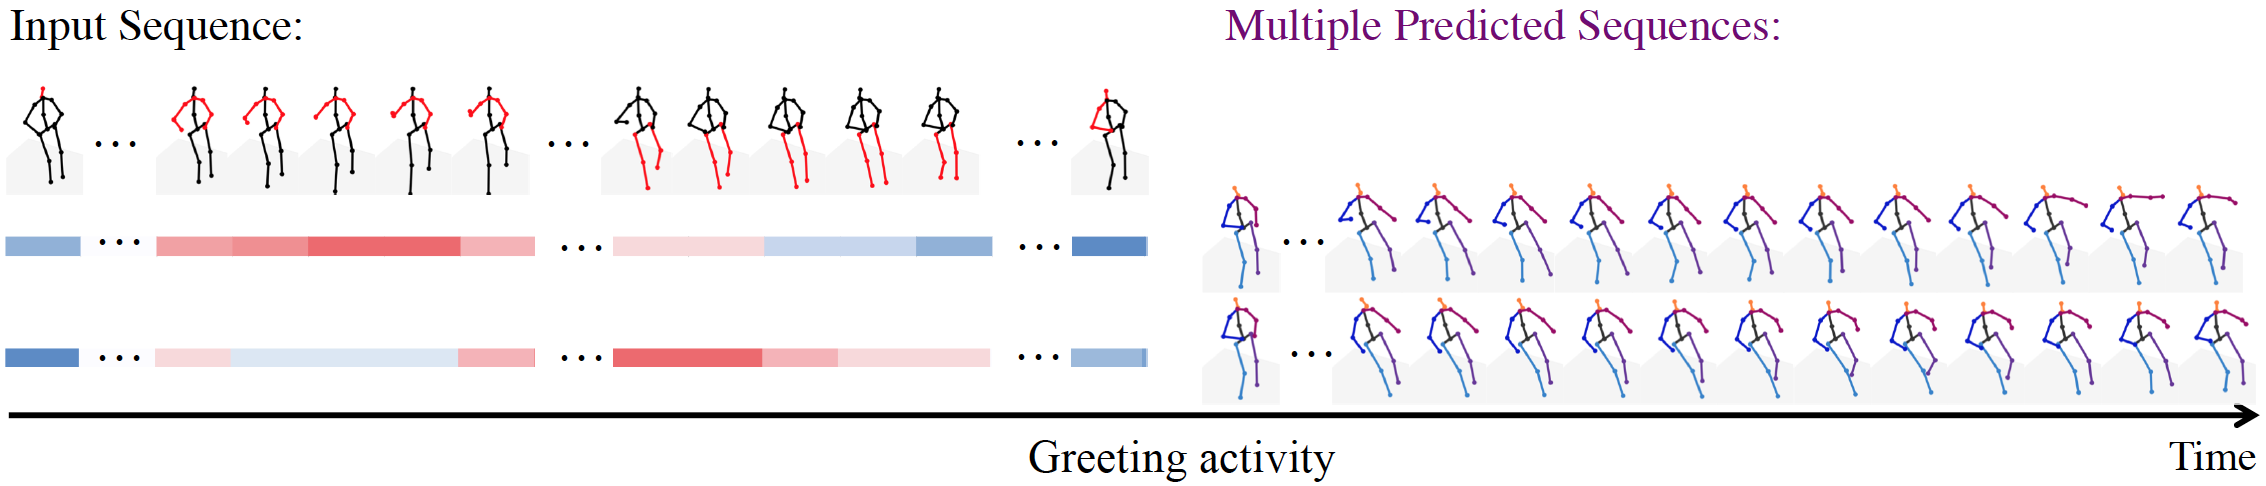 Stochastic Dual-Attention Long-Term Motion Prediction